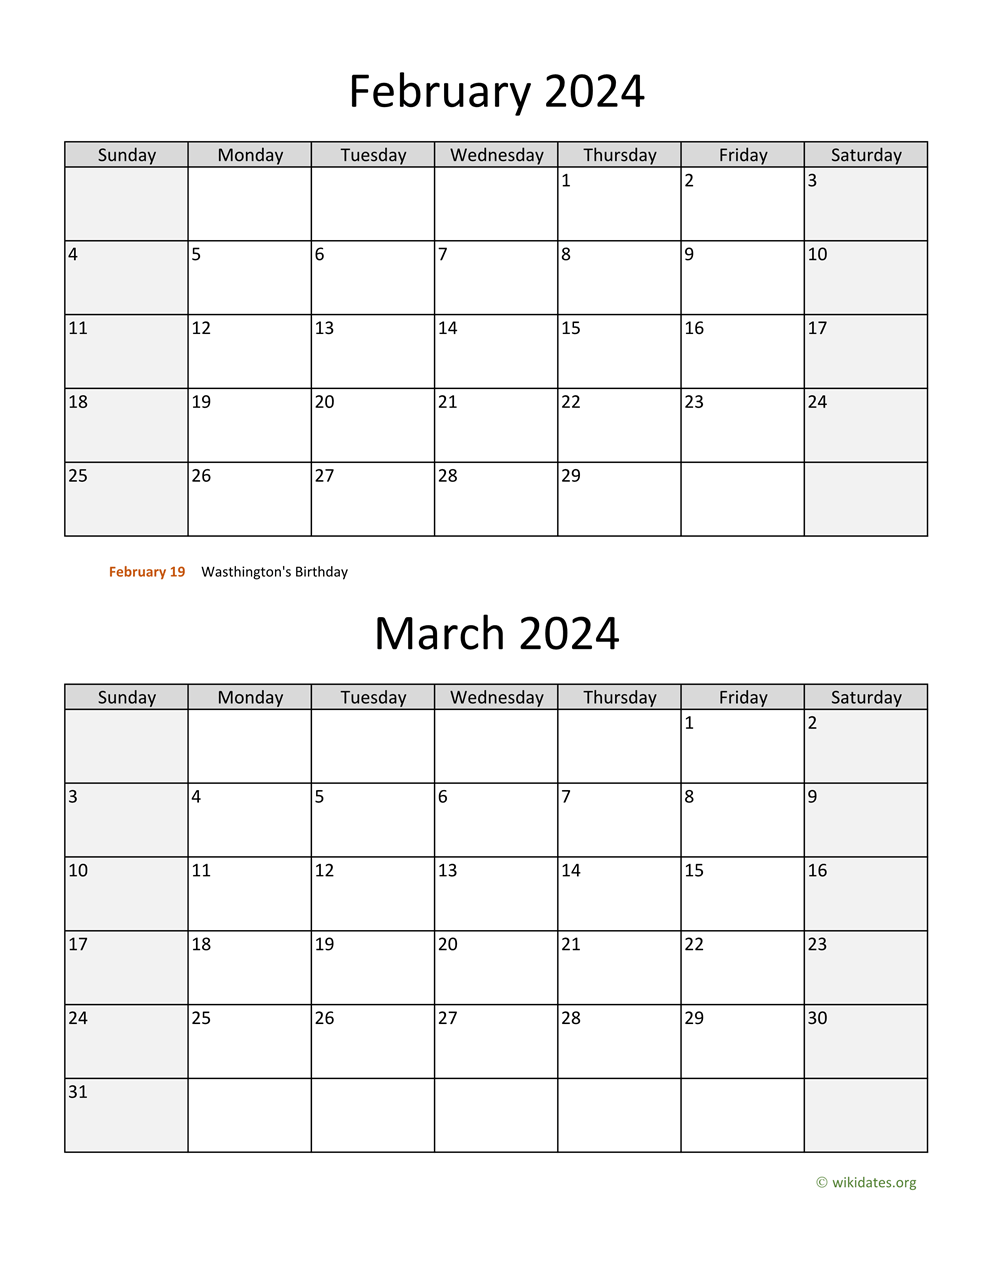 February And March 2024 Calendar | Wikidates for Printable Calendar Feb March 2024